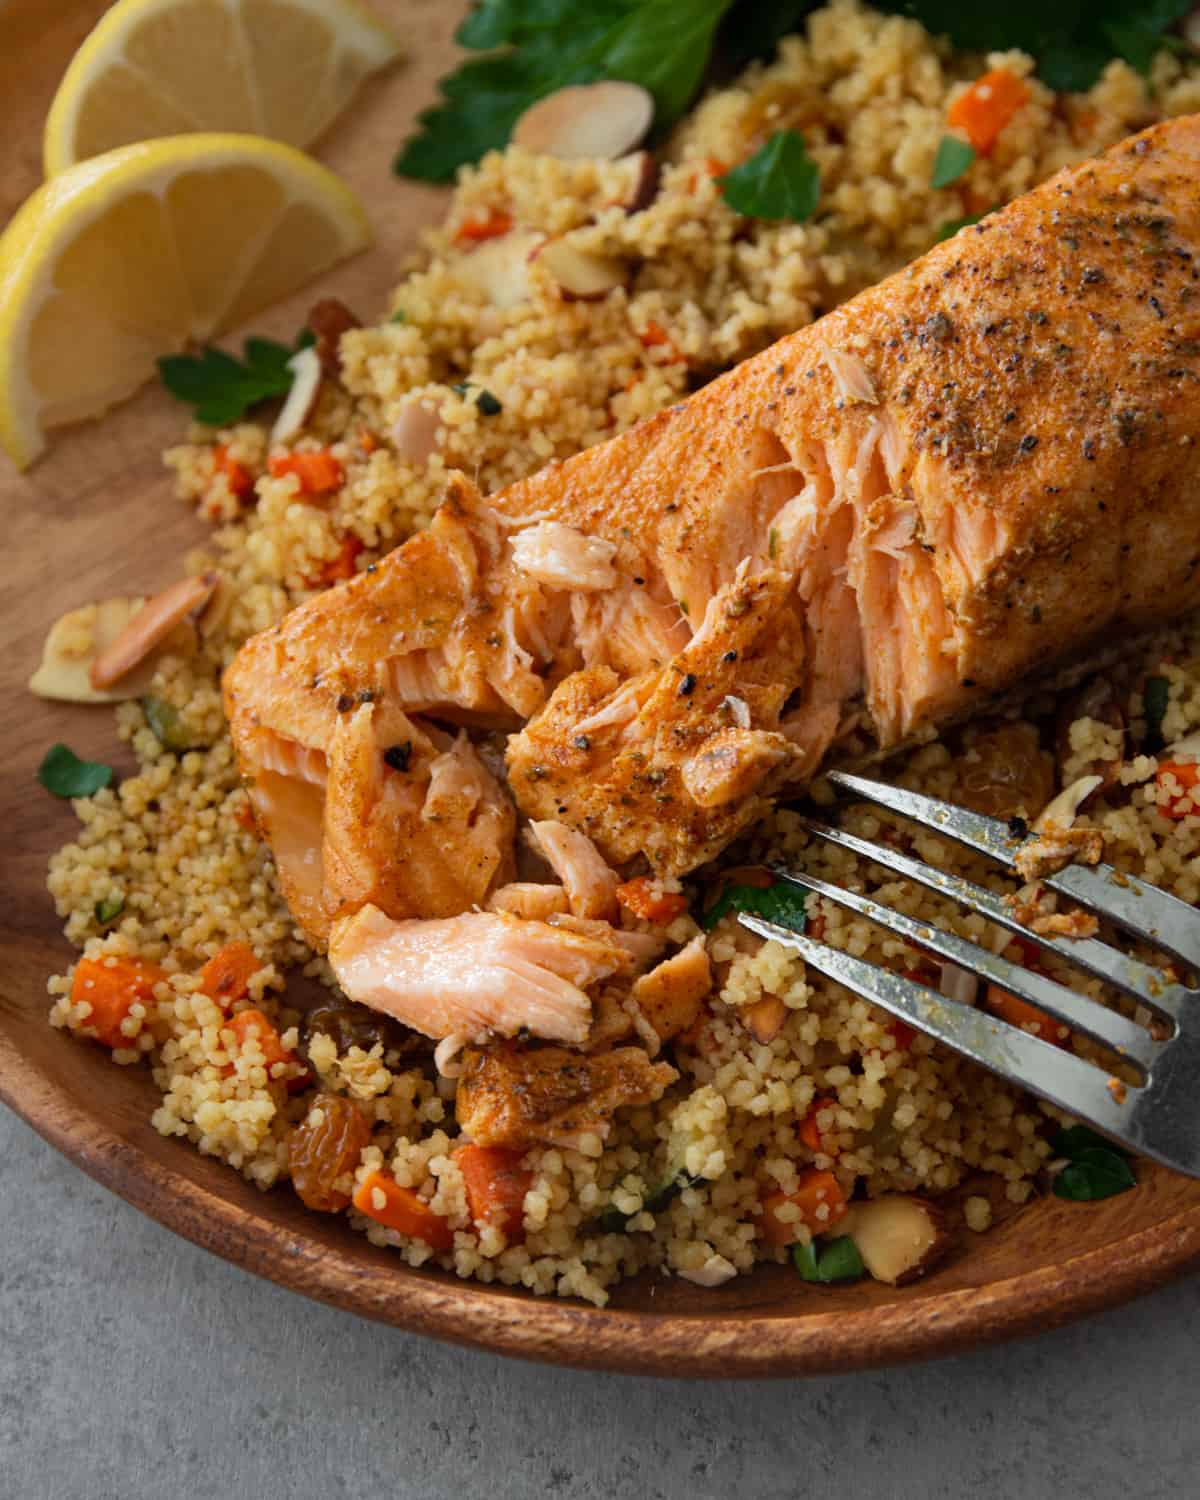 salmon and couscous on a wooden plate with a fork